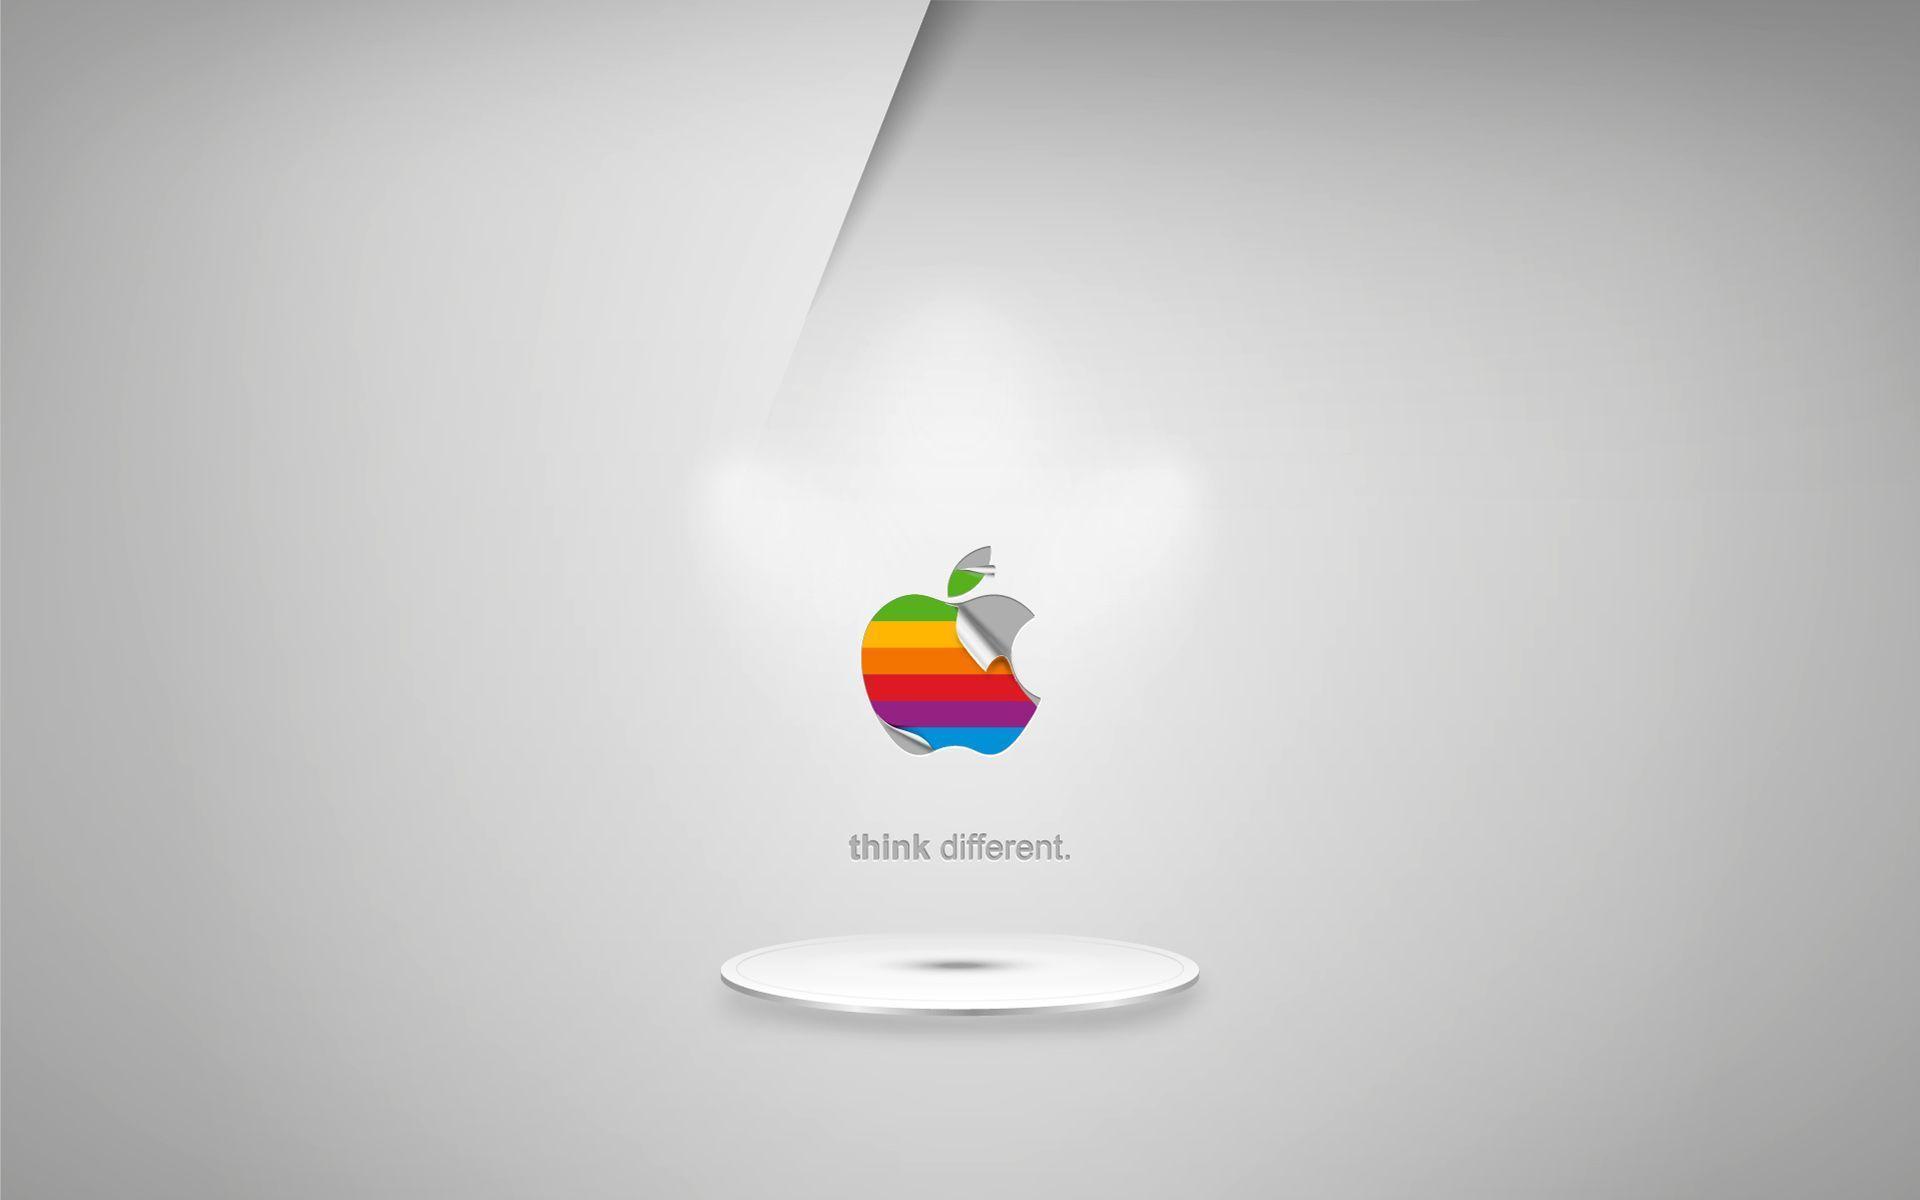 Image For > Think Different Apple Wallpapers